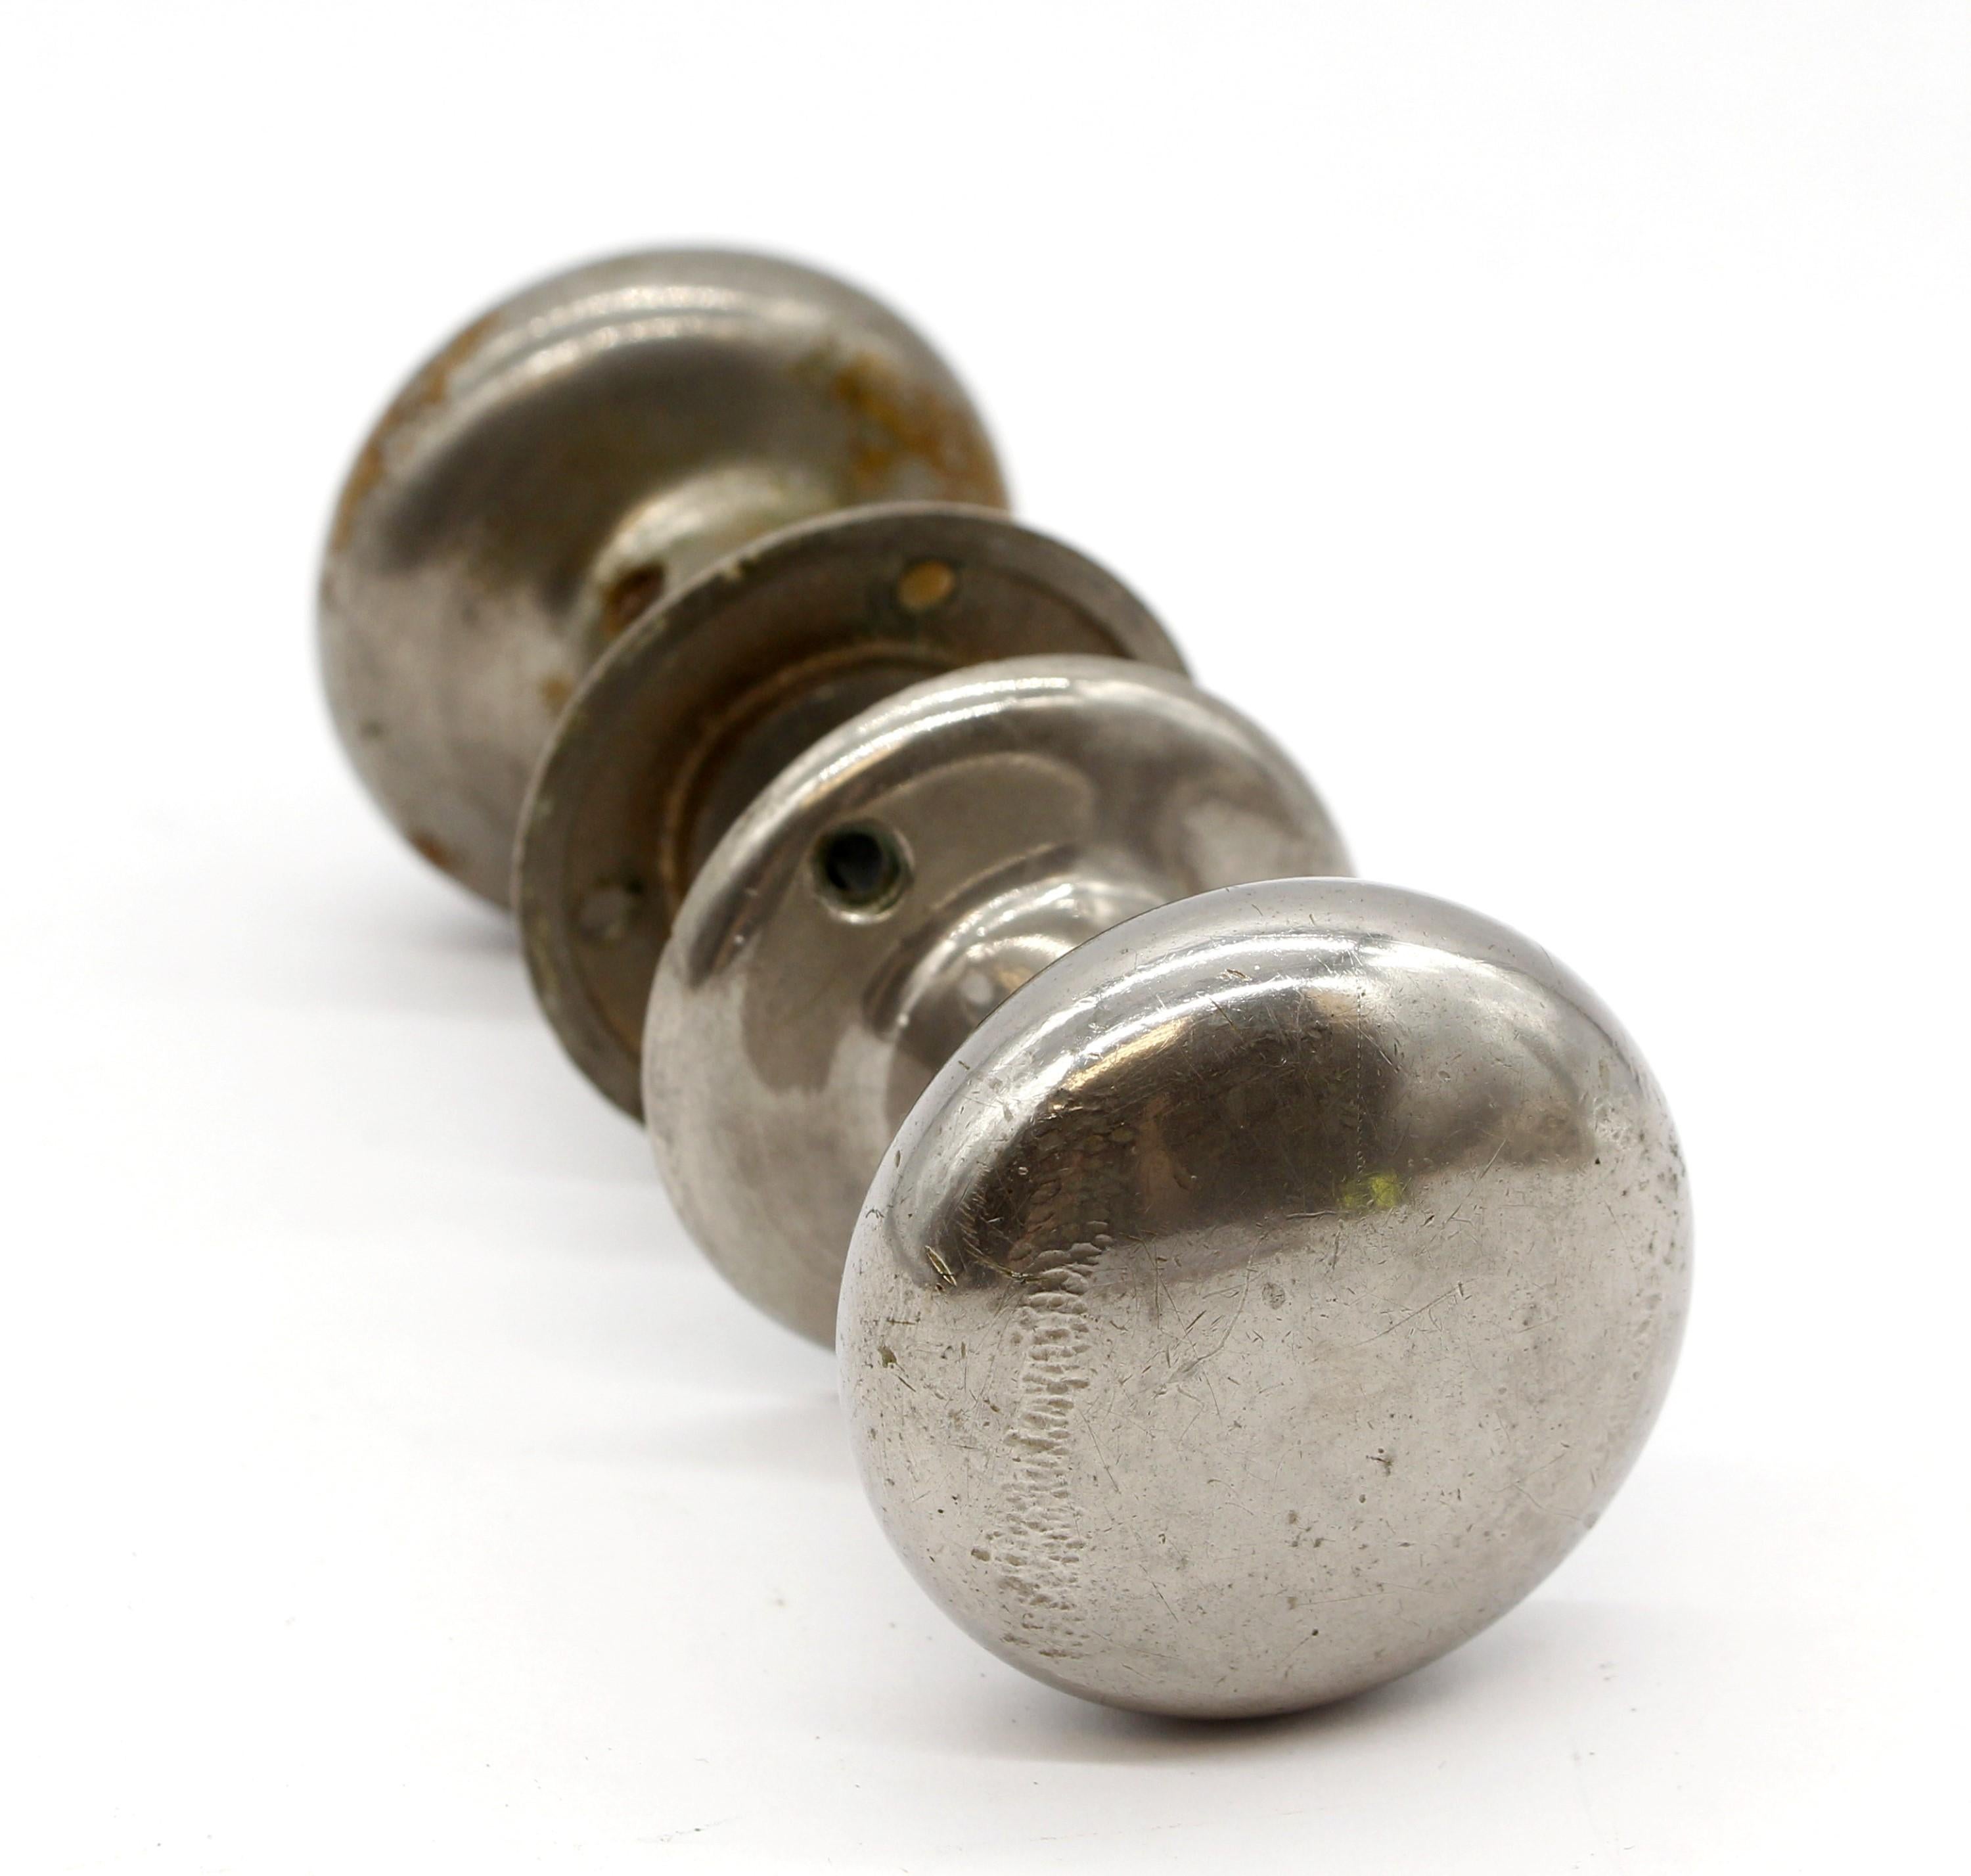 Solid nickel-plated brass doorknob set with matching heavy rosettes. There is some wear with the nickel plating due to age and use. Small quantity available at time of posting. Priced each. Please inquire. Please note, this item is located in our